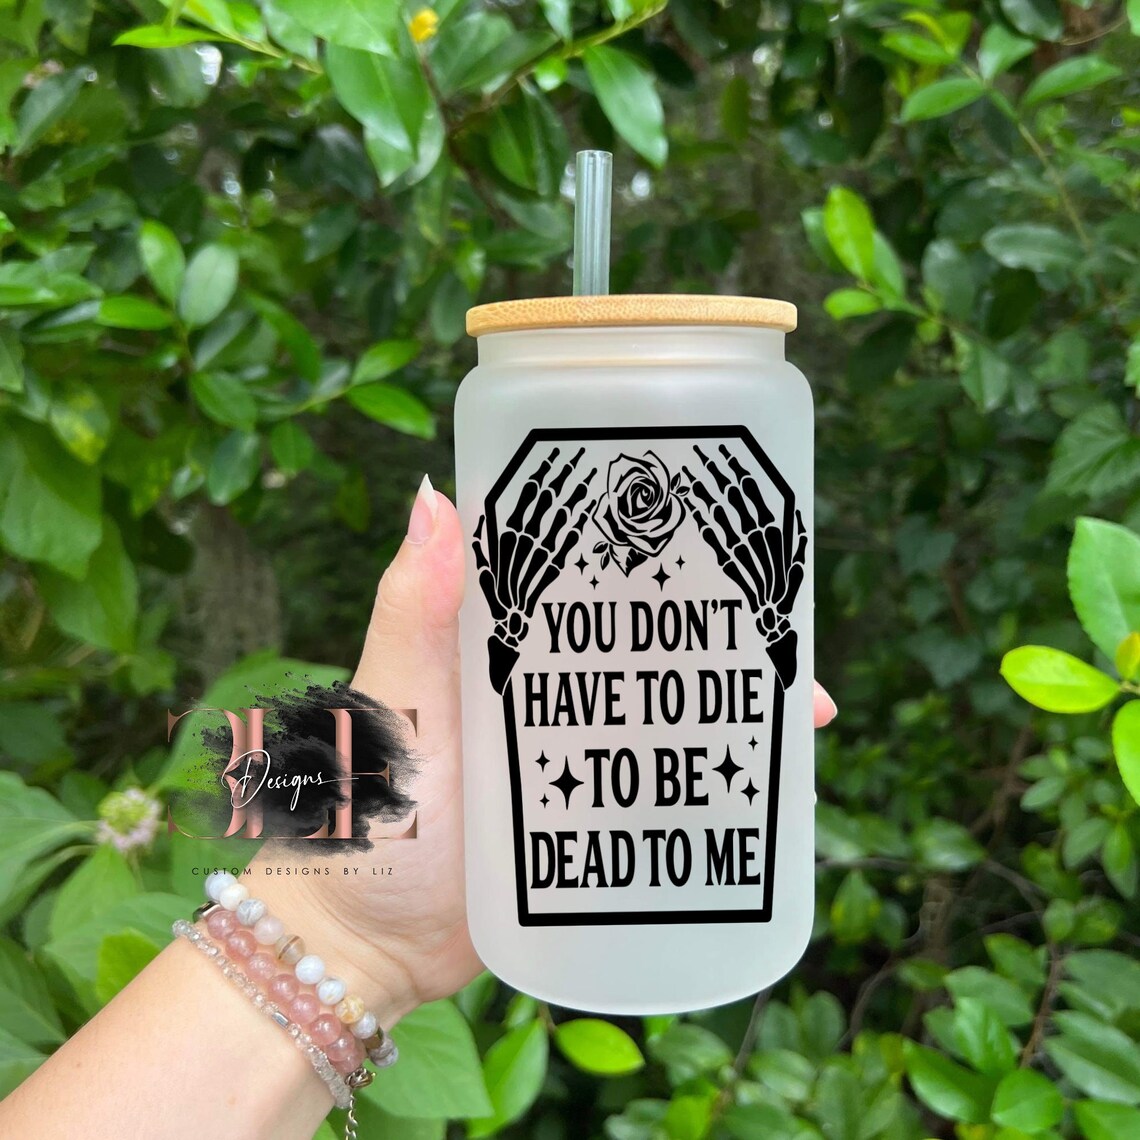 You Don’t Have To Be Dead To Be Dead To Me 16oz Glass Tumbler with Bamboo Lid and Straw, Funny Glass Cup Gift, Adult Humor, Halloween Cup,